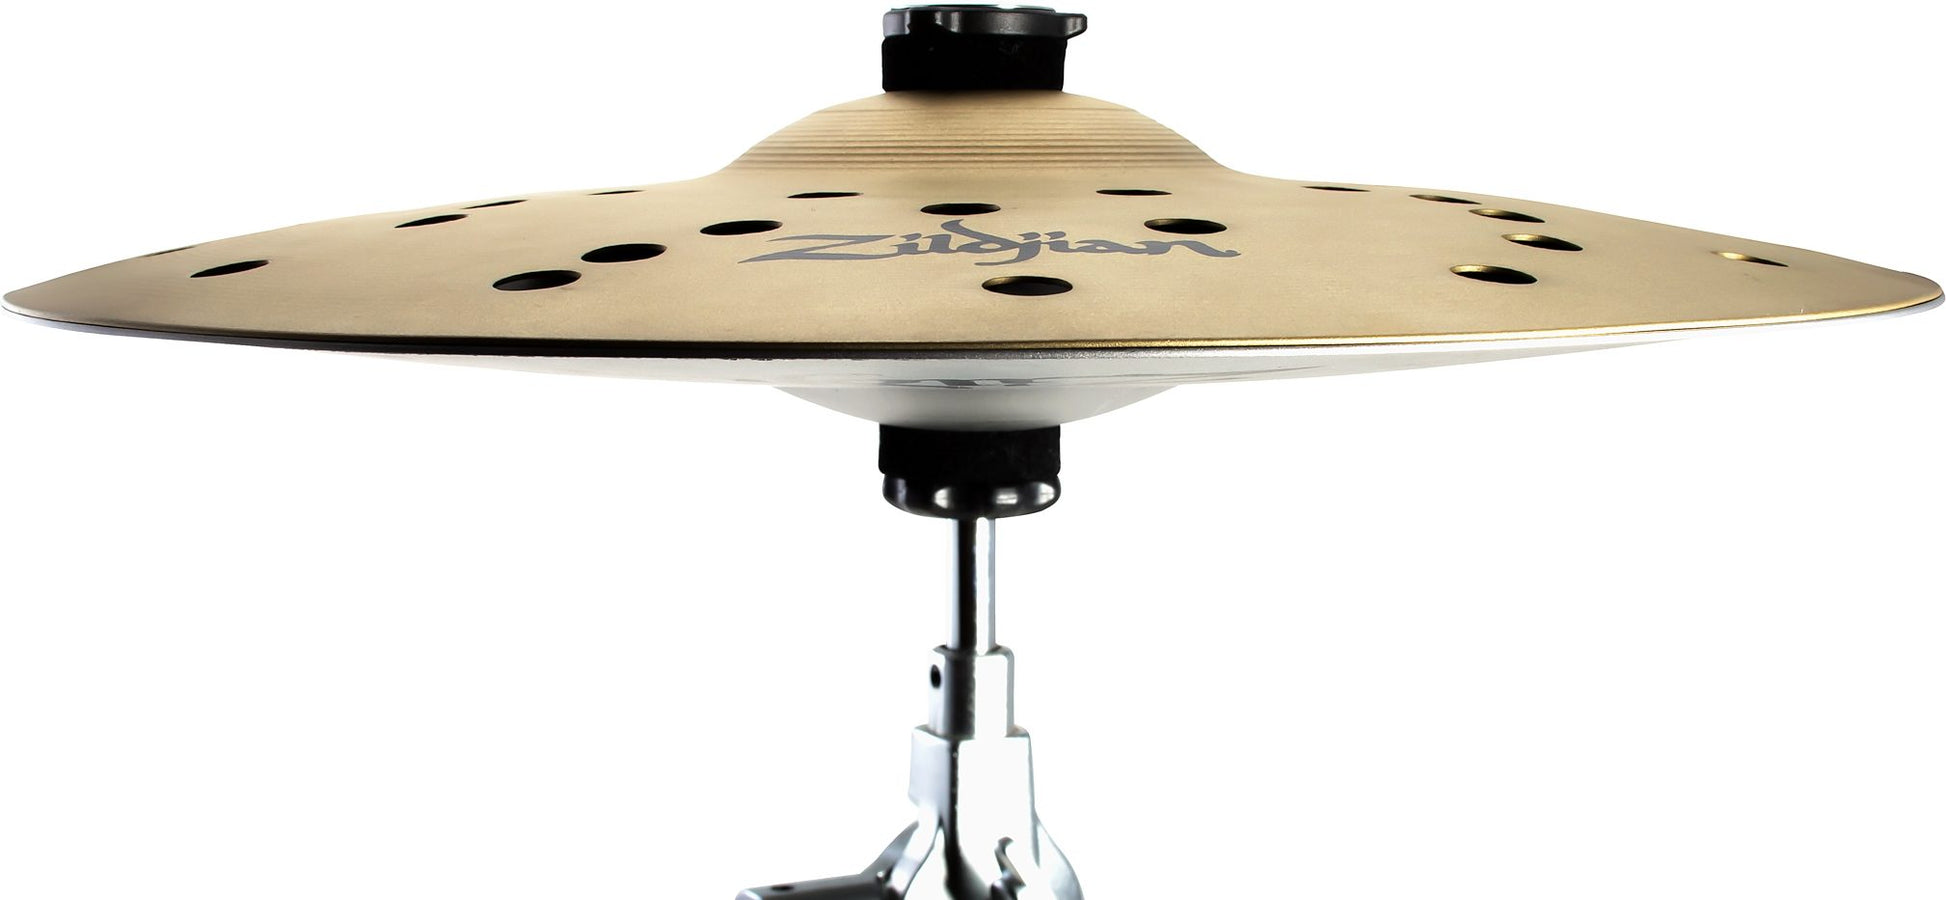 Zildjian FX Stack Hi-Hat Cymbal Pair (with Mount), 14 Inch